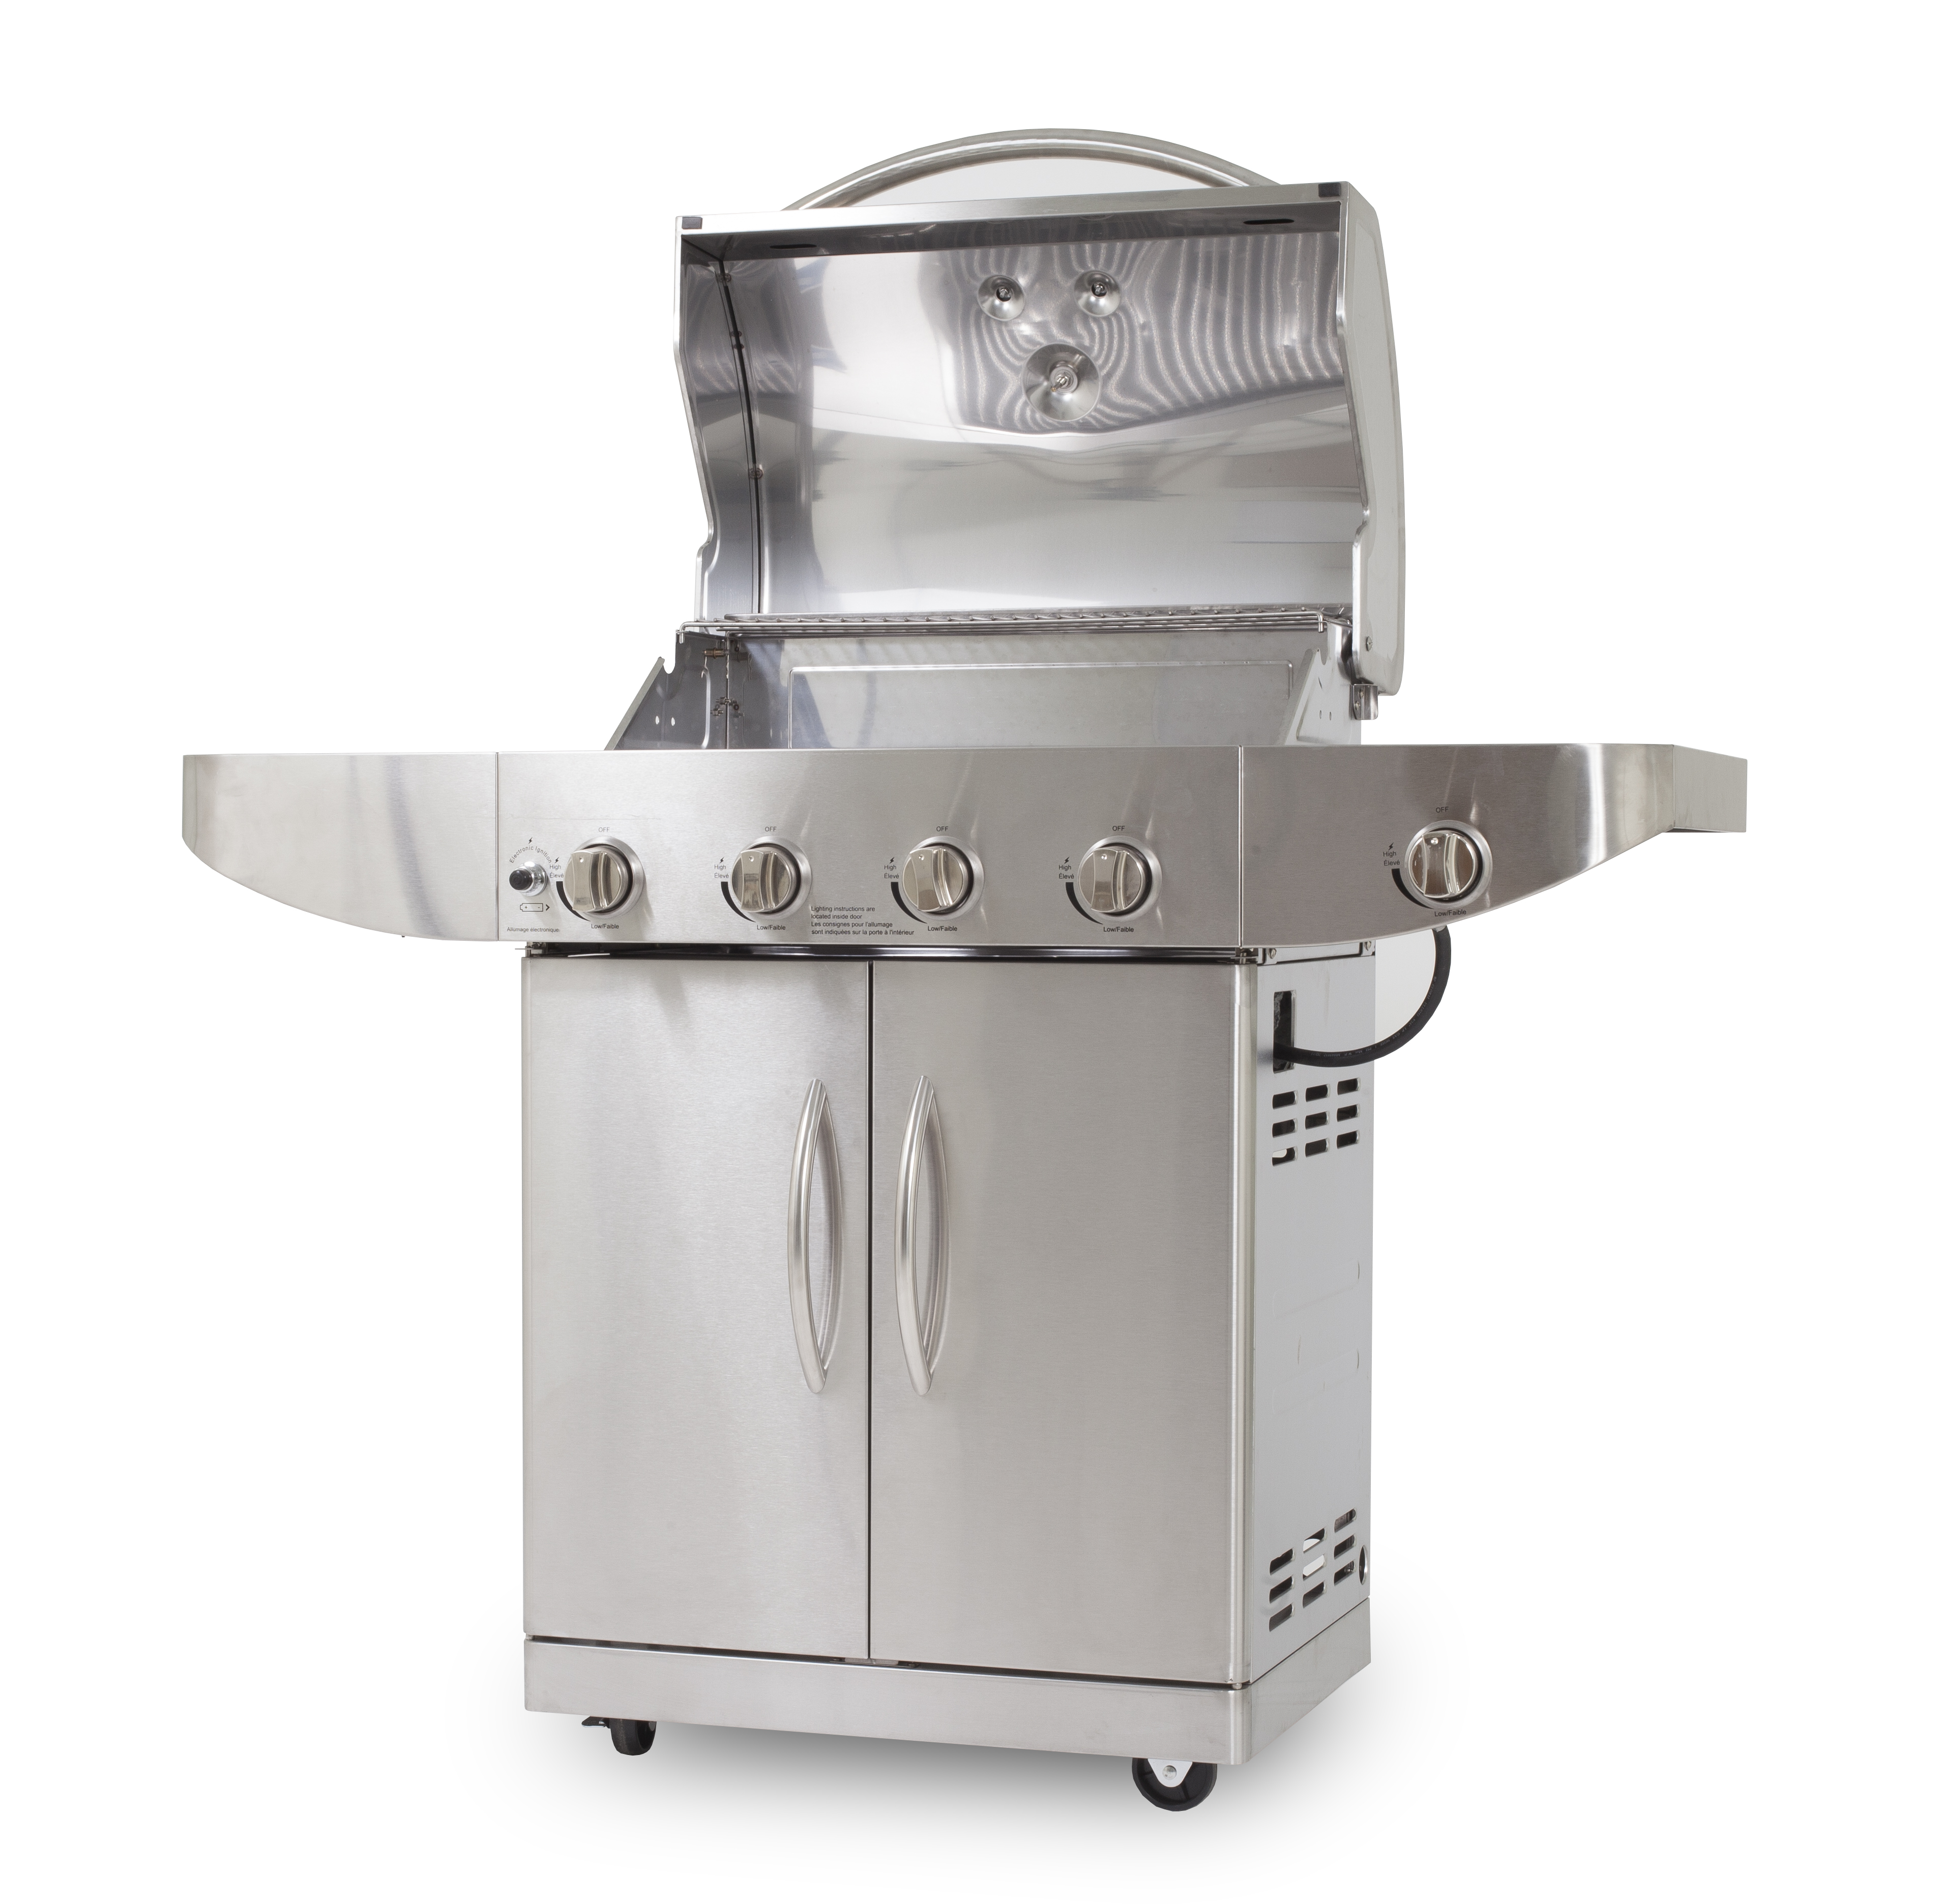 Pit Boss Stainless Steel 4-Burner Barbecue Gas Grill with Side Burner - image 3 of 4